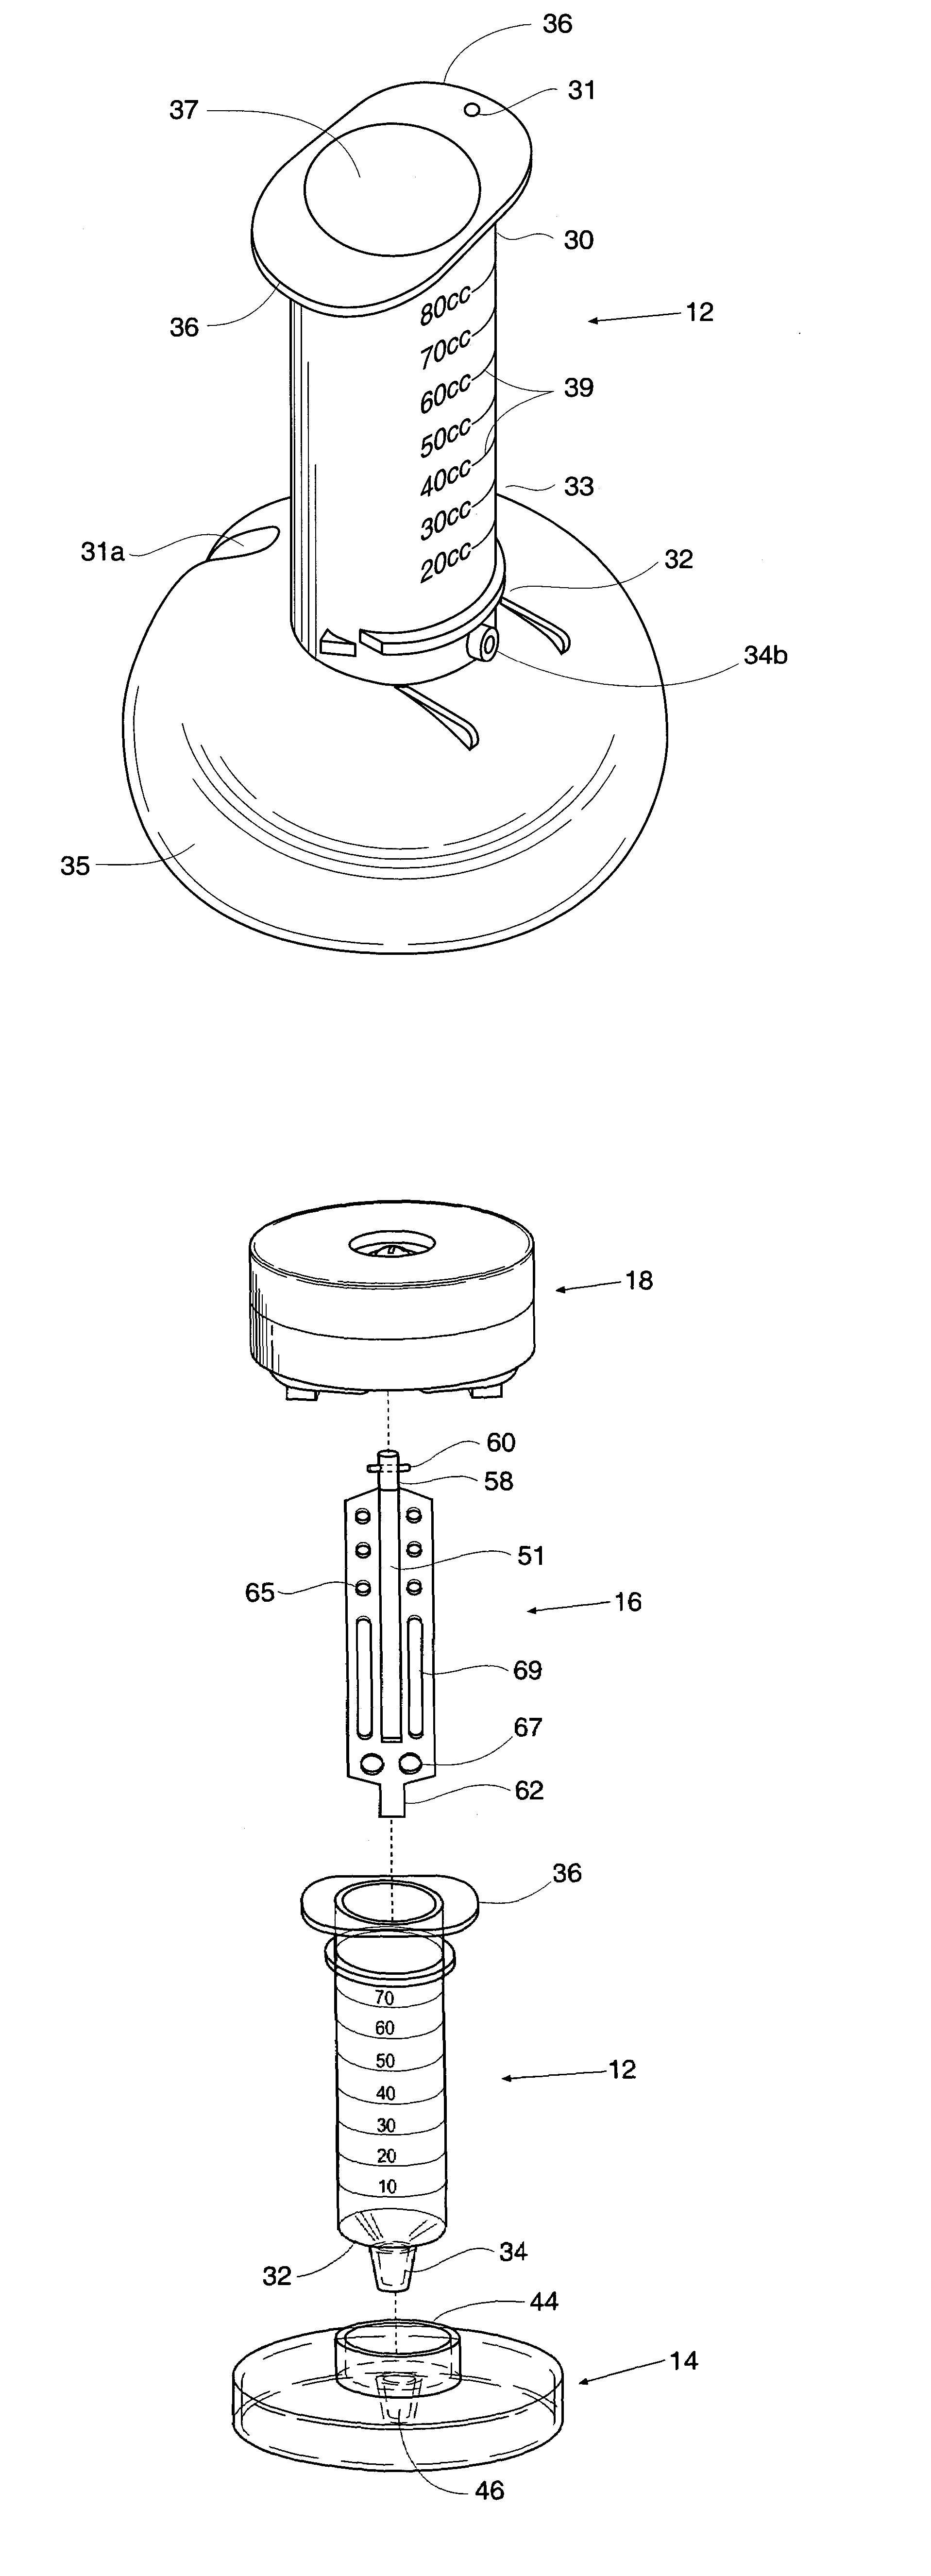 Methods for mixing and transferring flowable materials